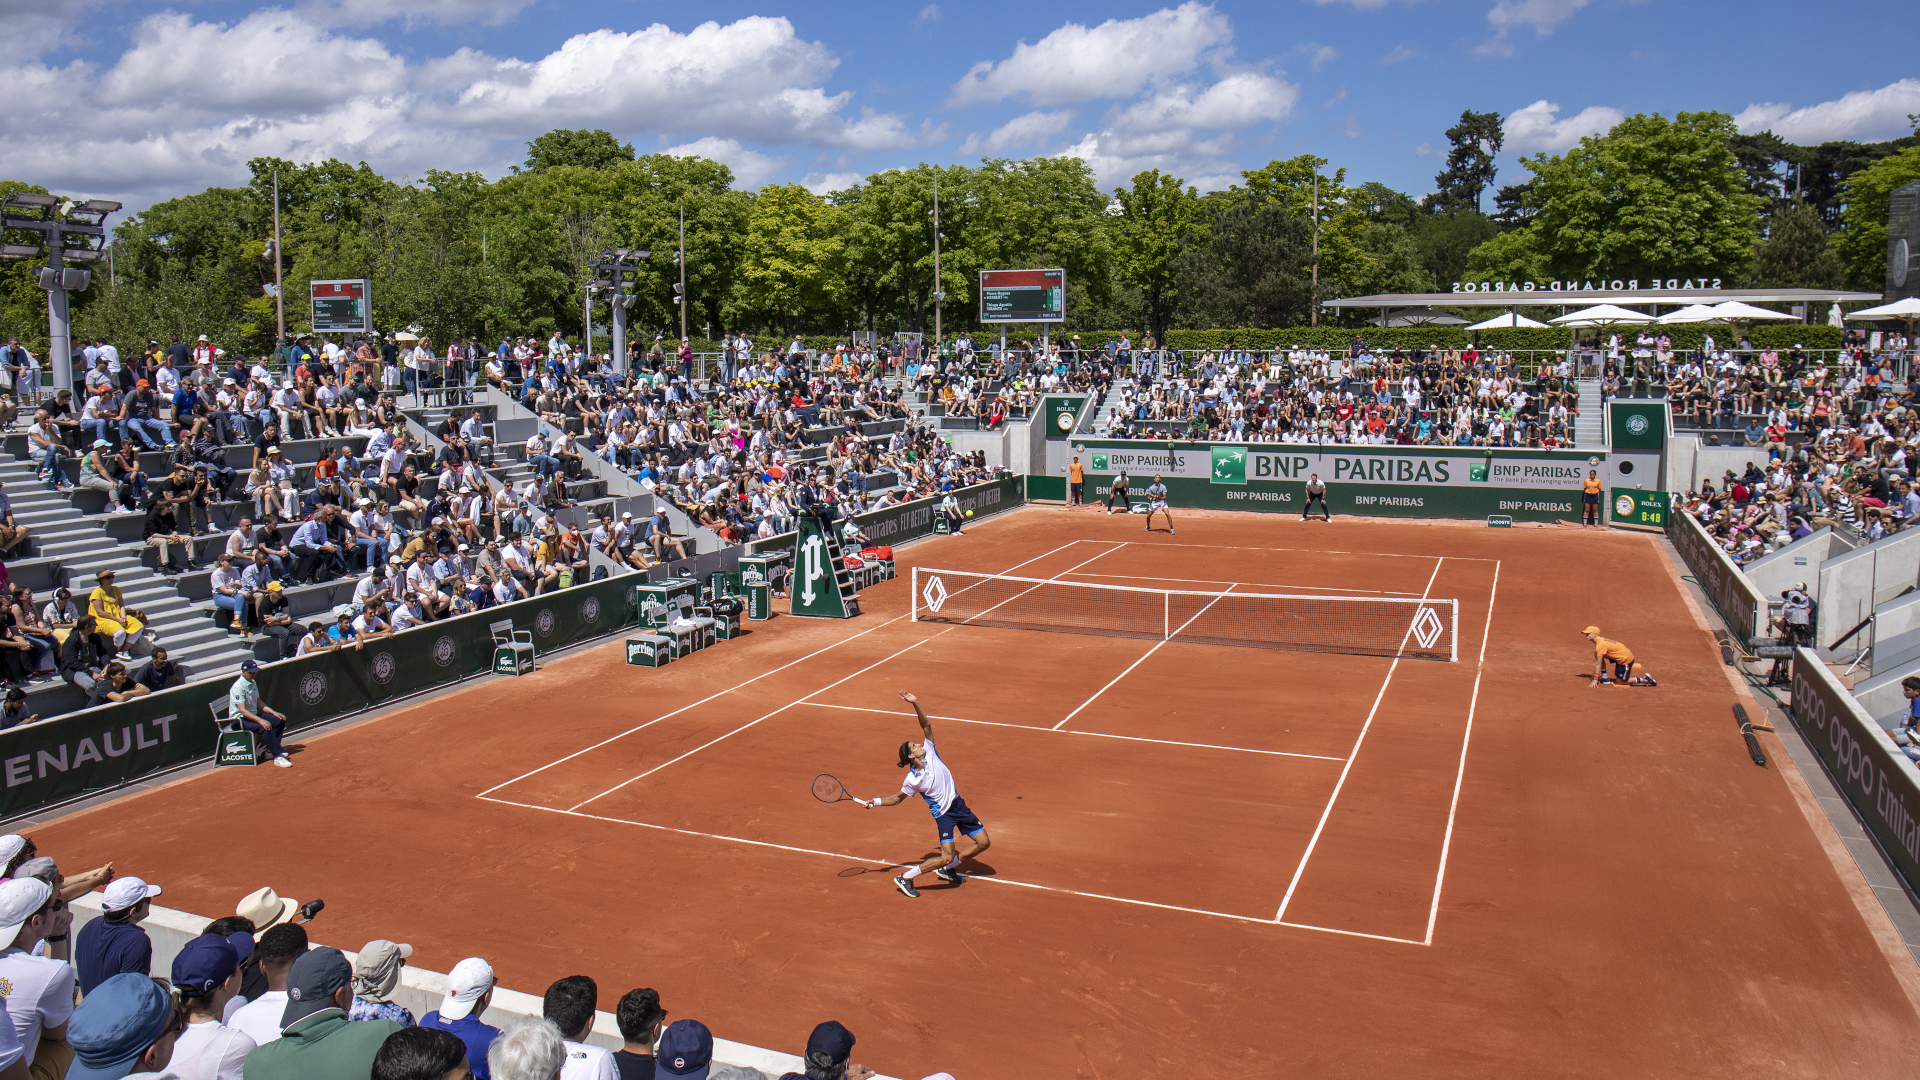 General view of the French Open clay court tennis at Roland Garros